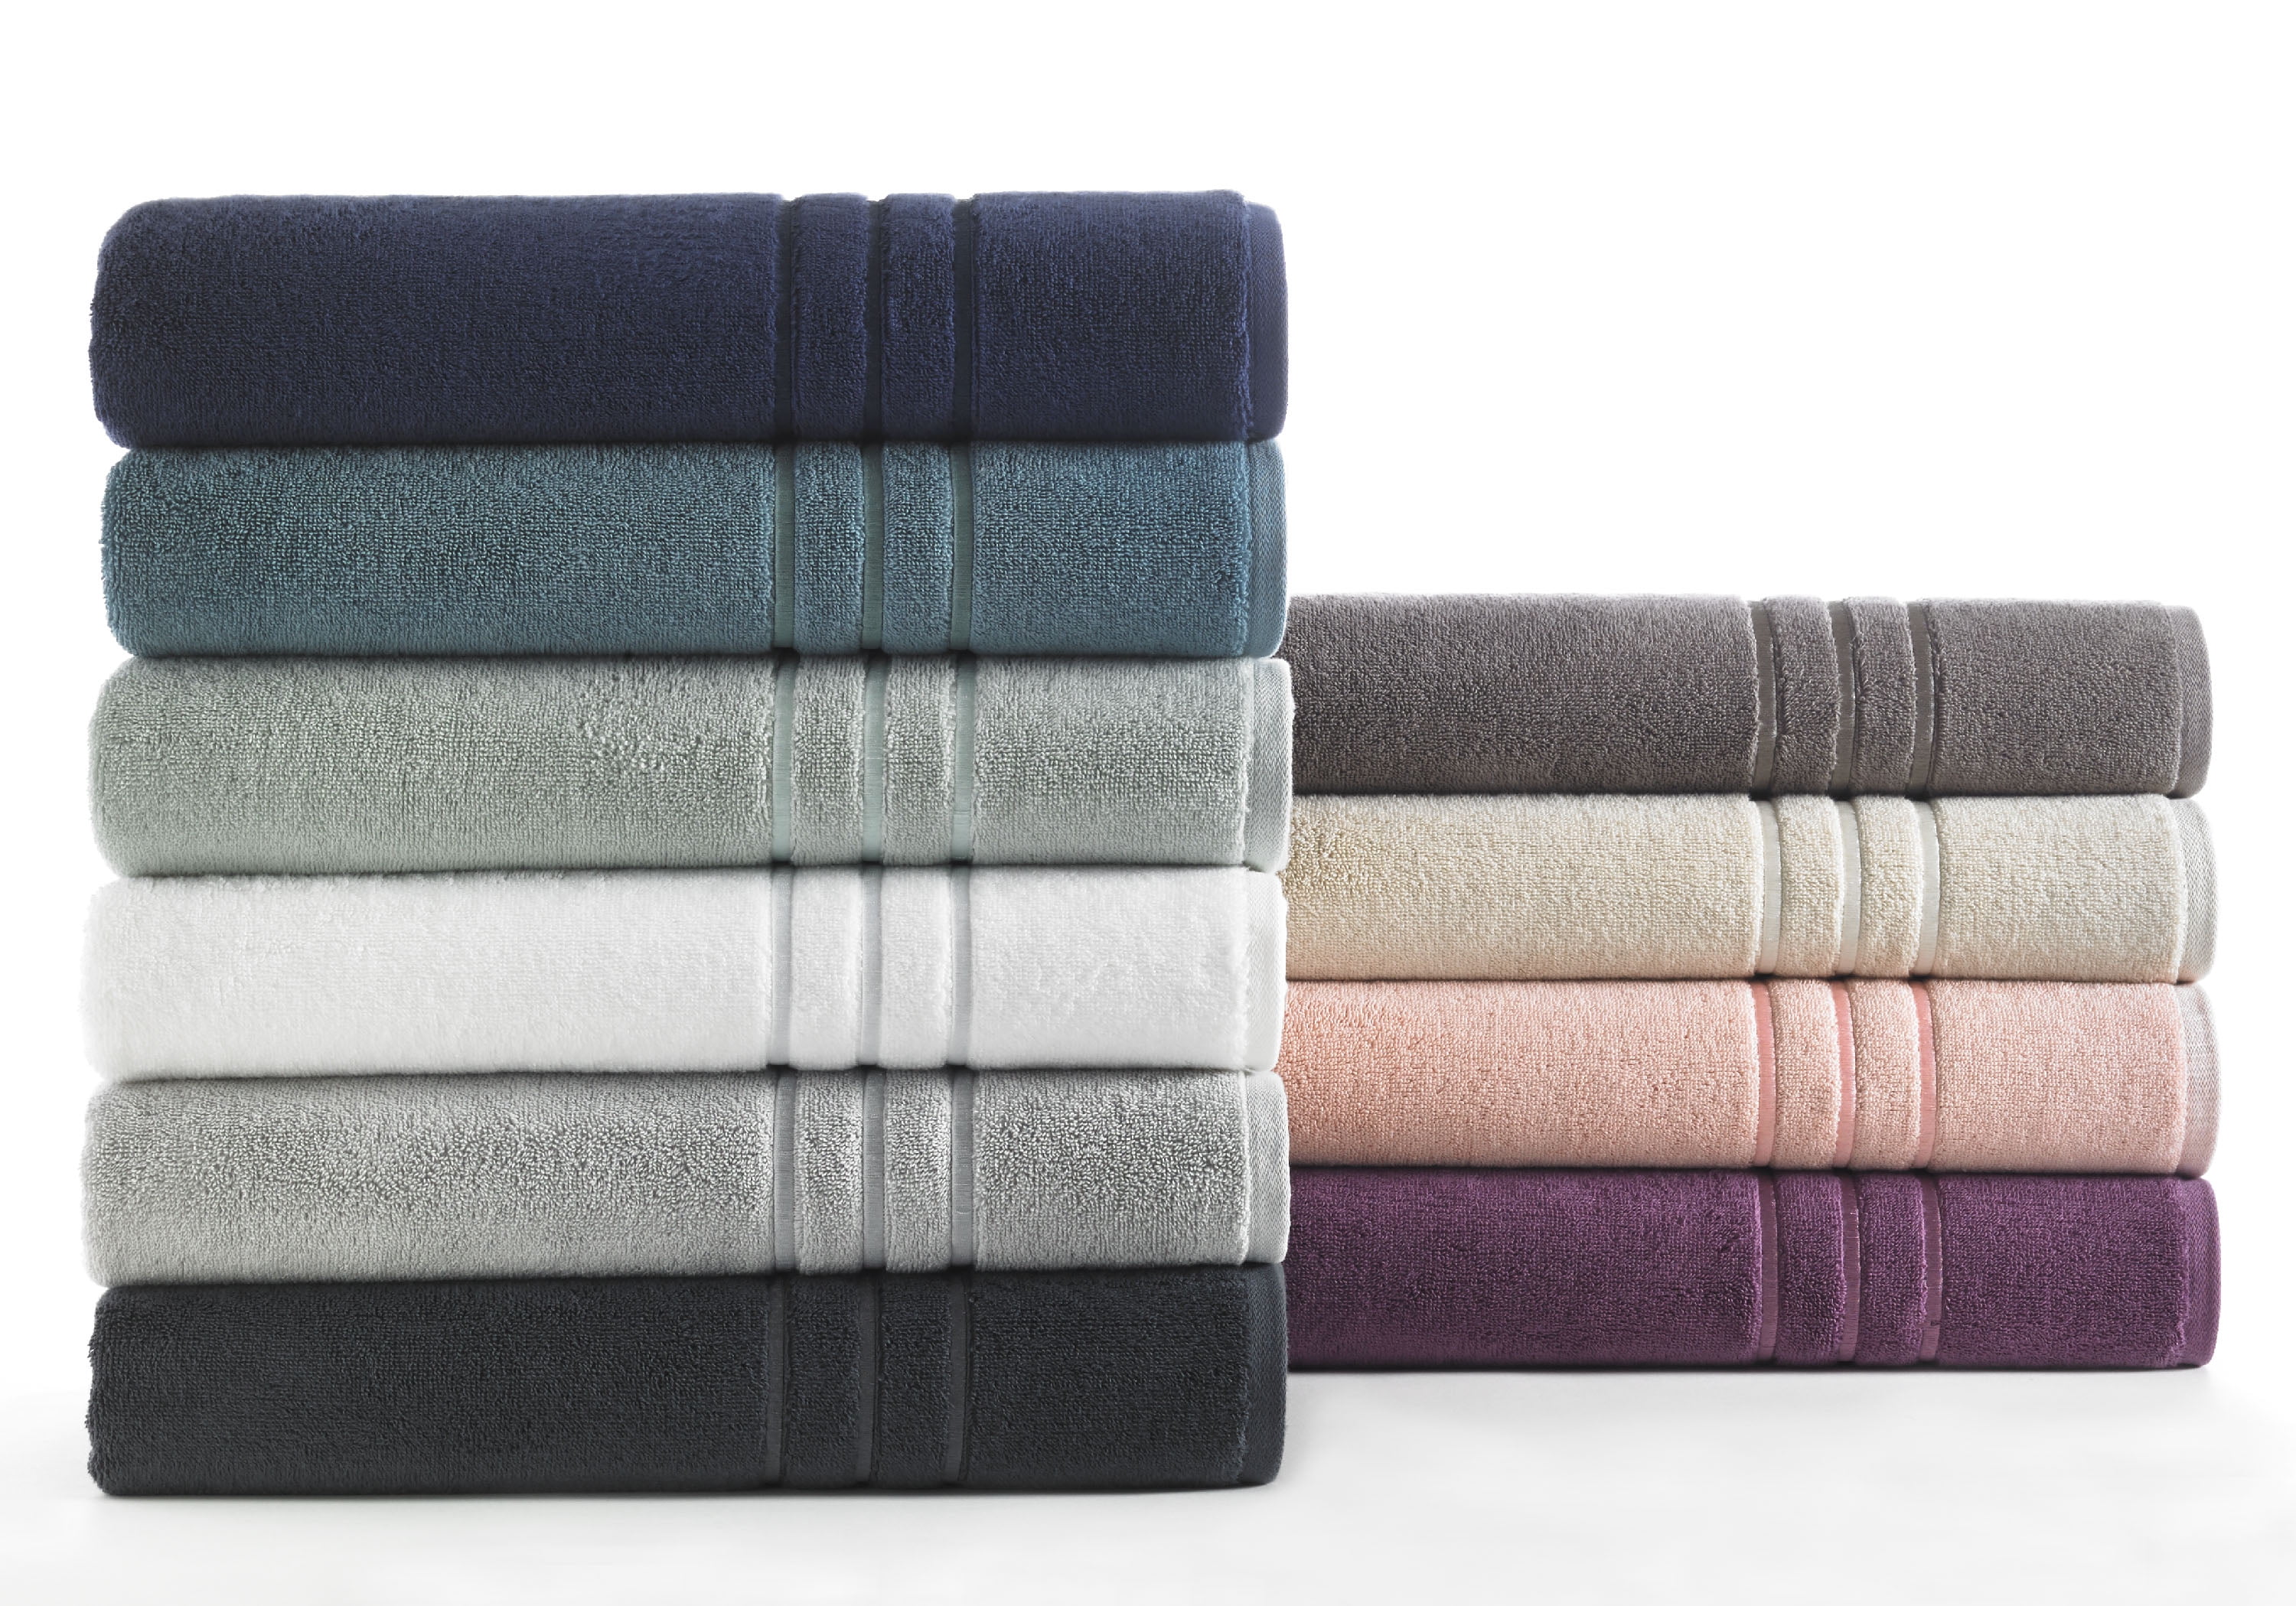 Hotel Style Egyptian Cotton Towel Collection – Walmart Inventory ...